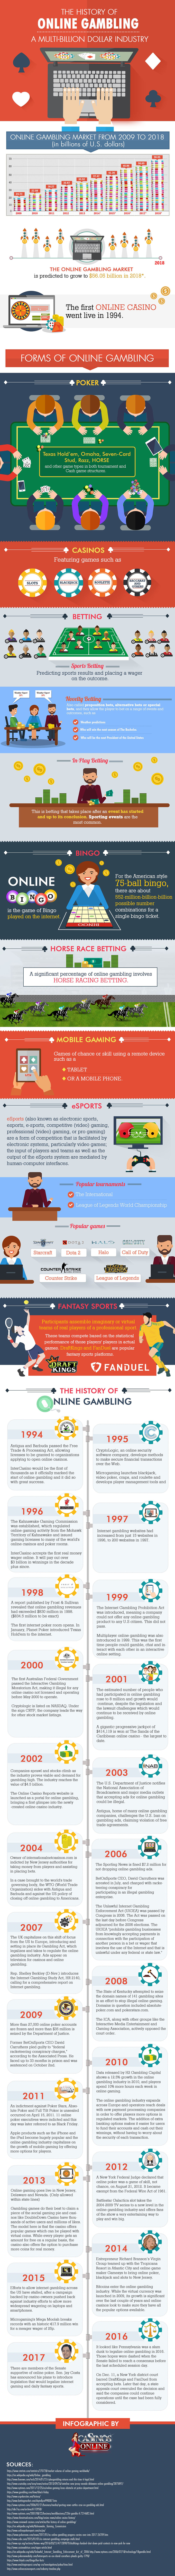 Infographic: The History of Online Gambling